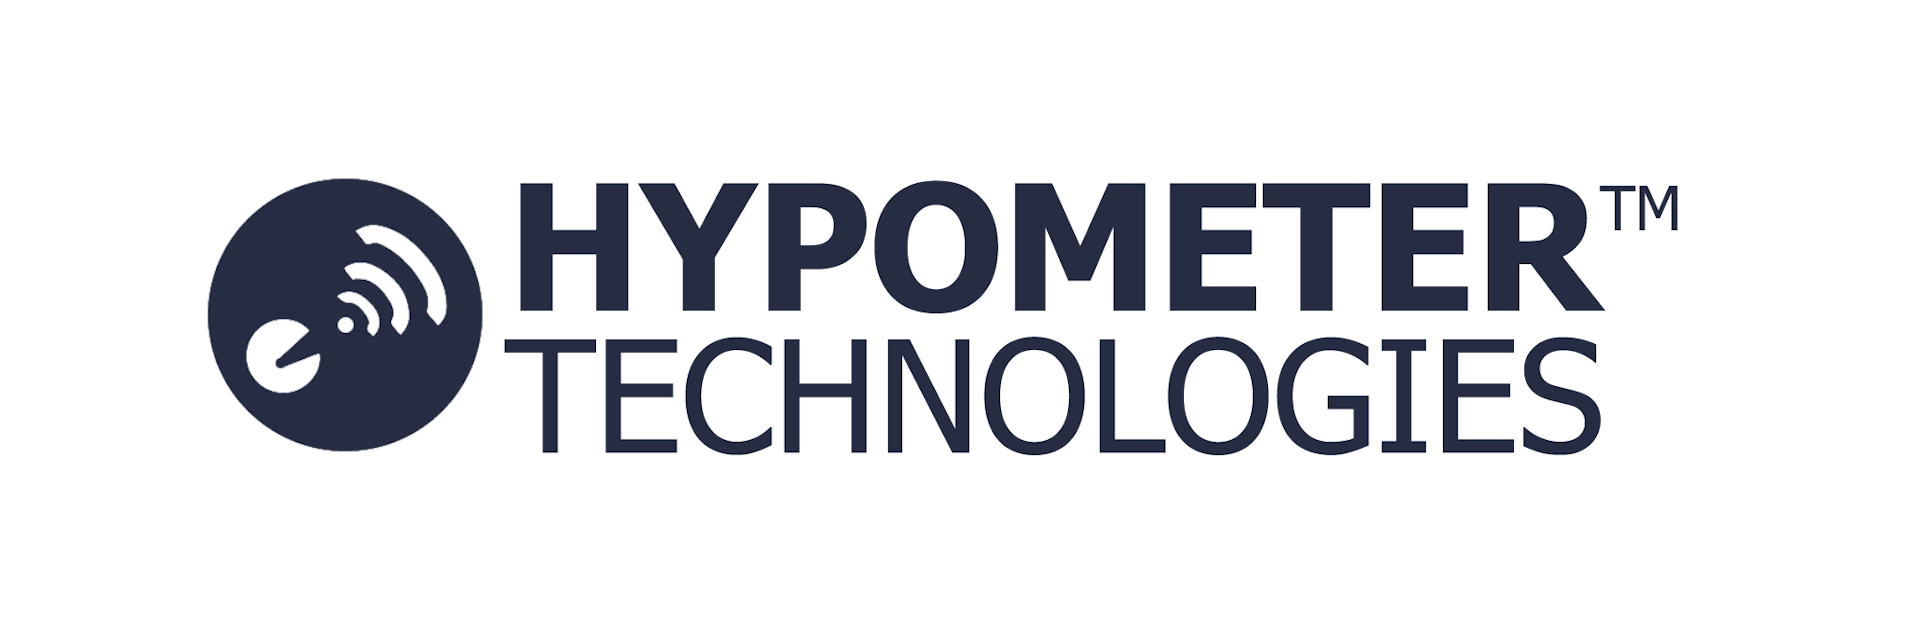 Hypometer Technologies main page image